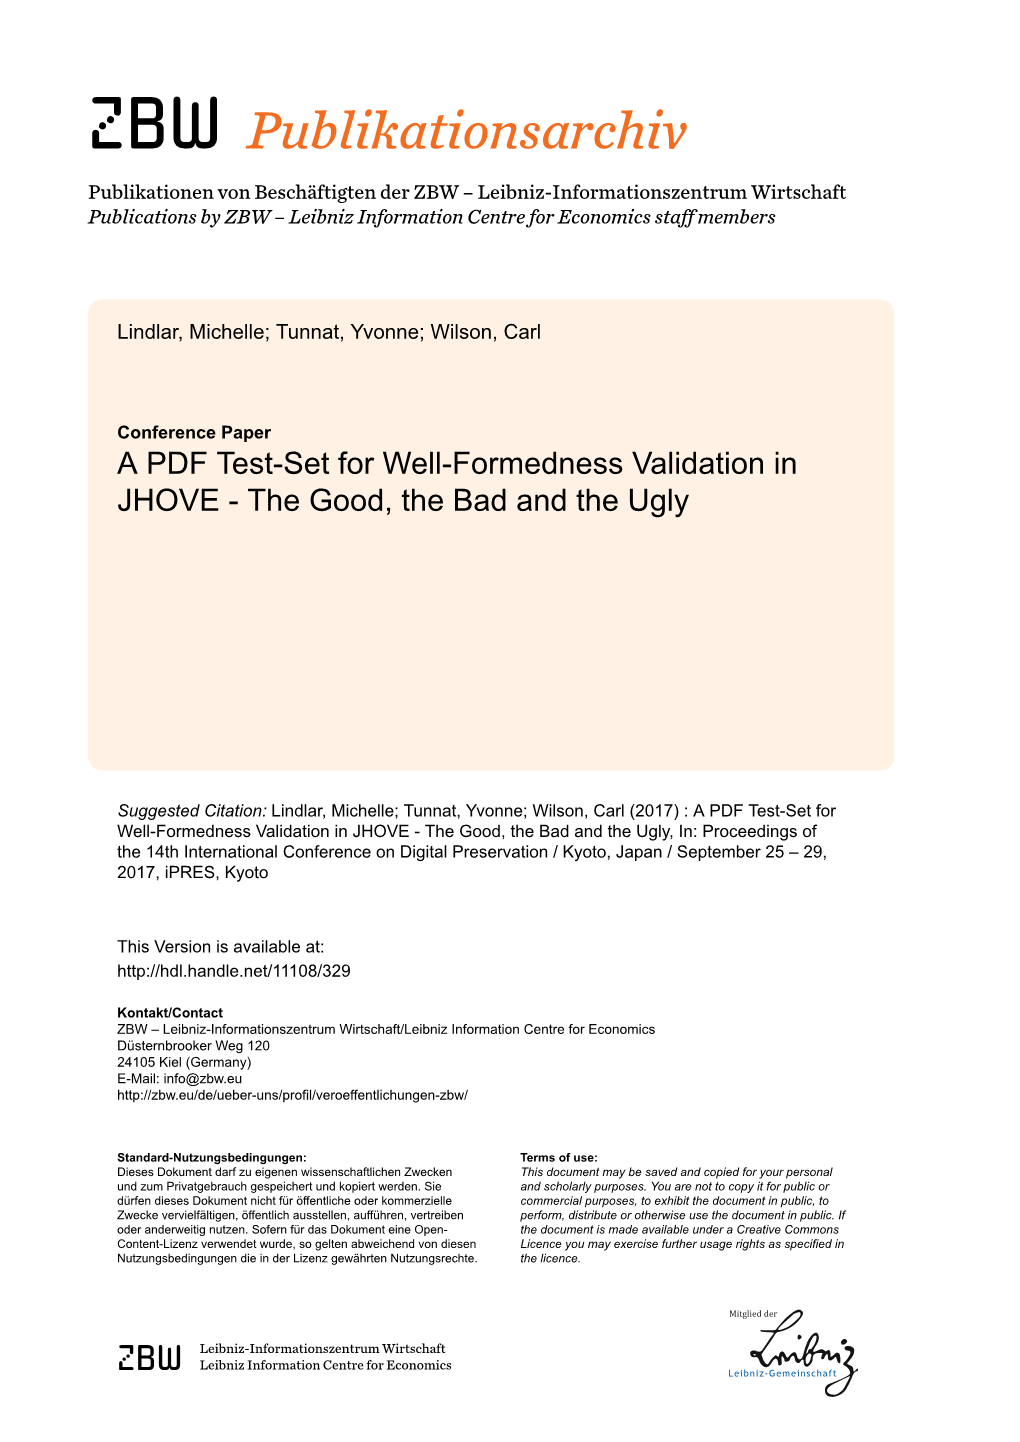 A PDF Test-Set for Well-Formedness Validation in JHOVE - the Good, the Bad and the Ugly